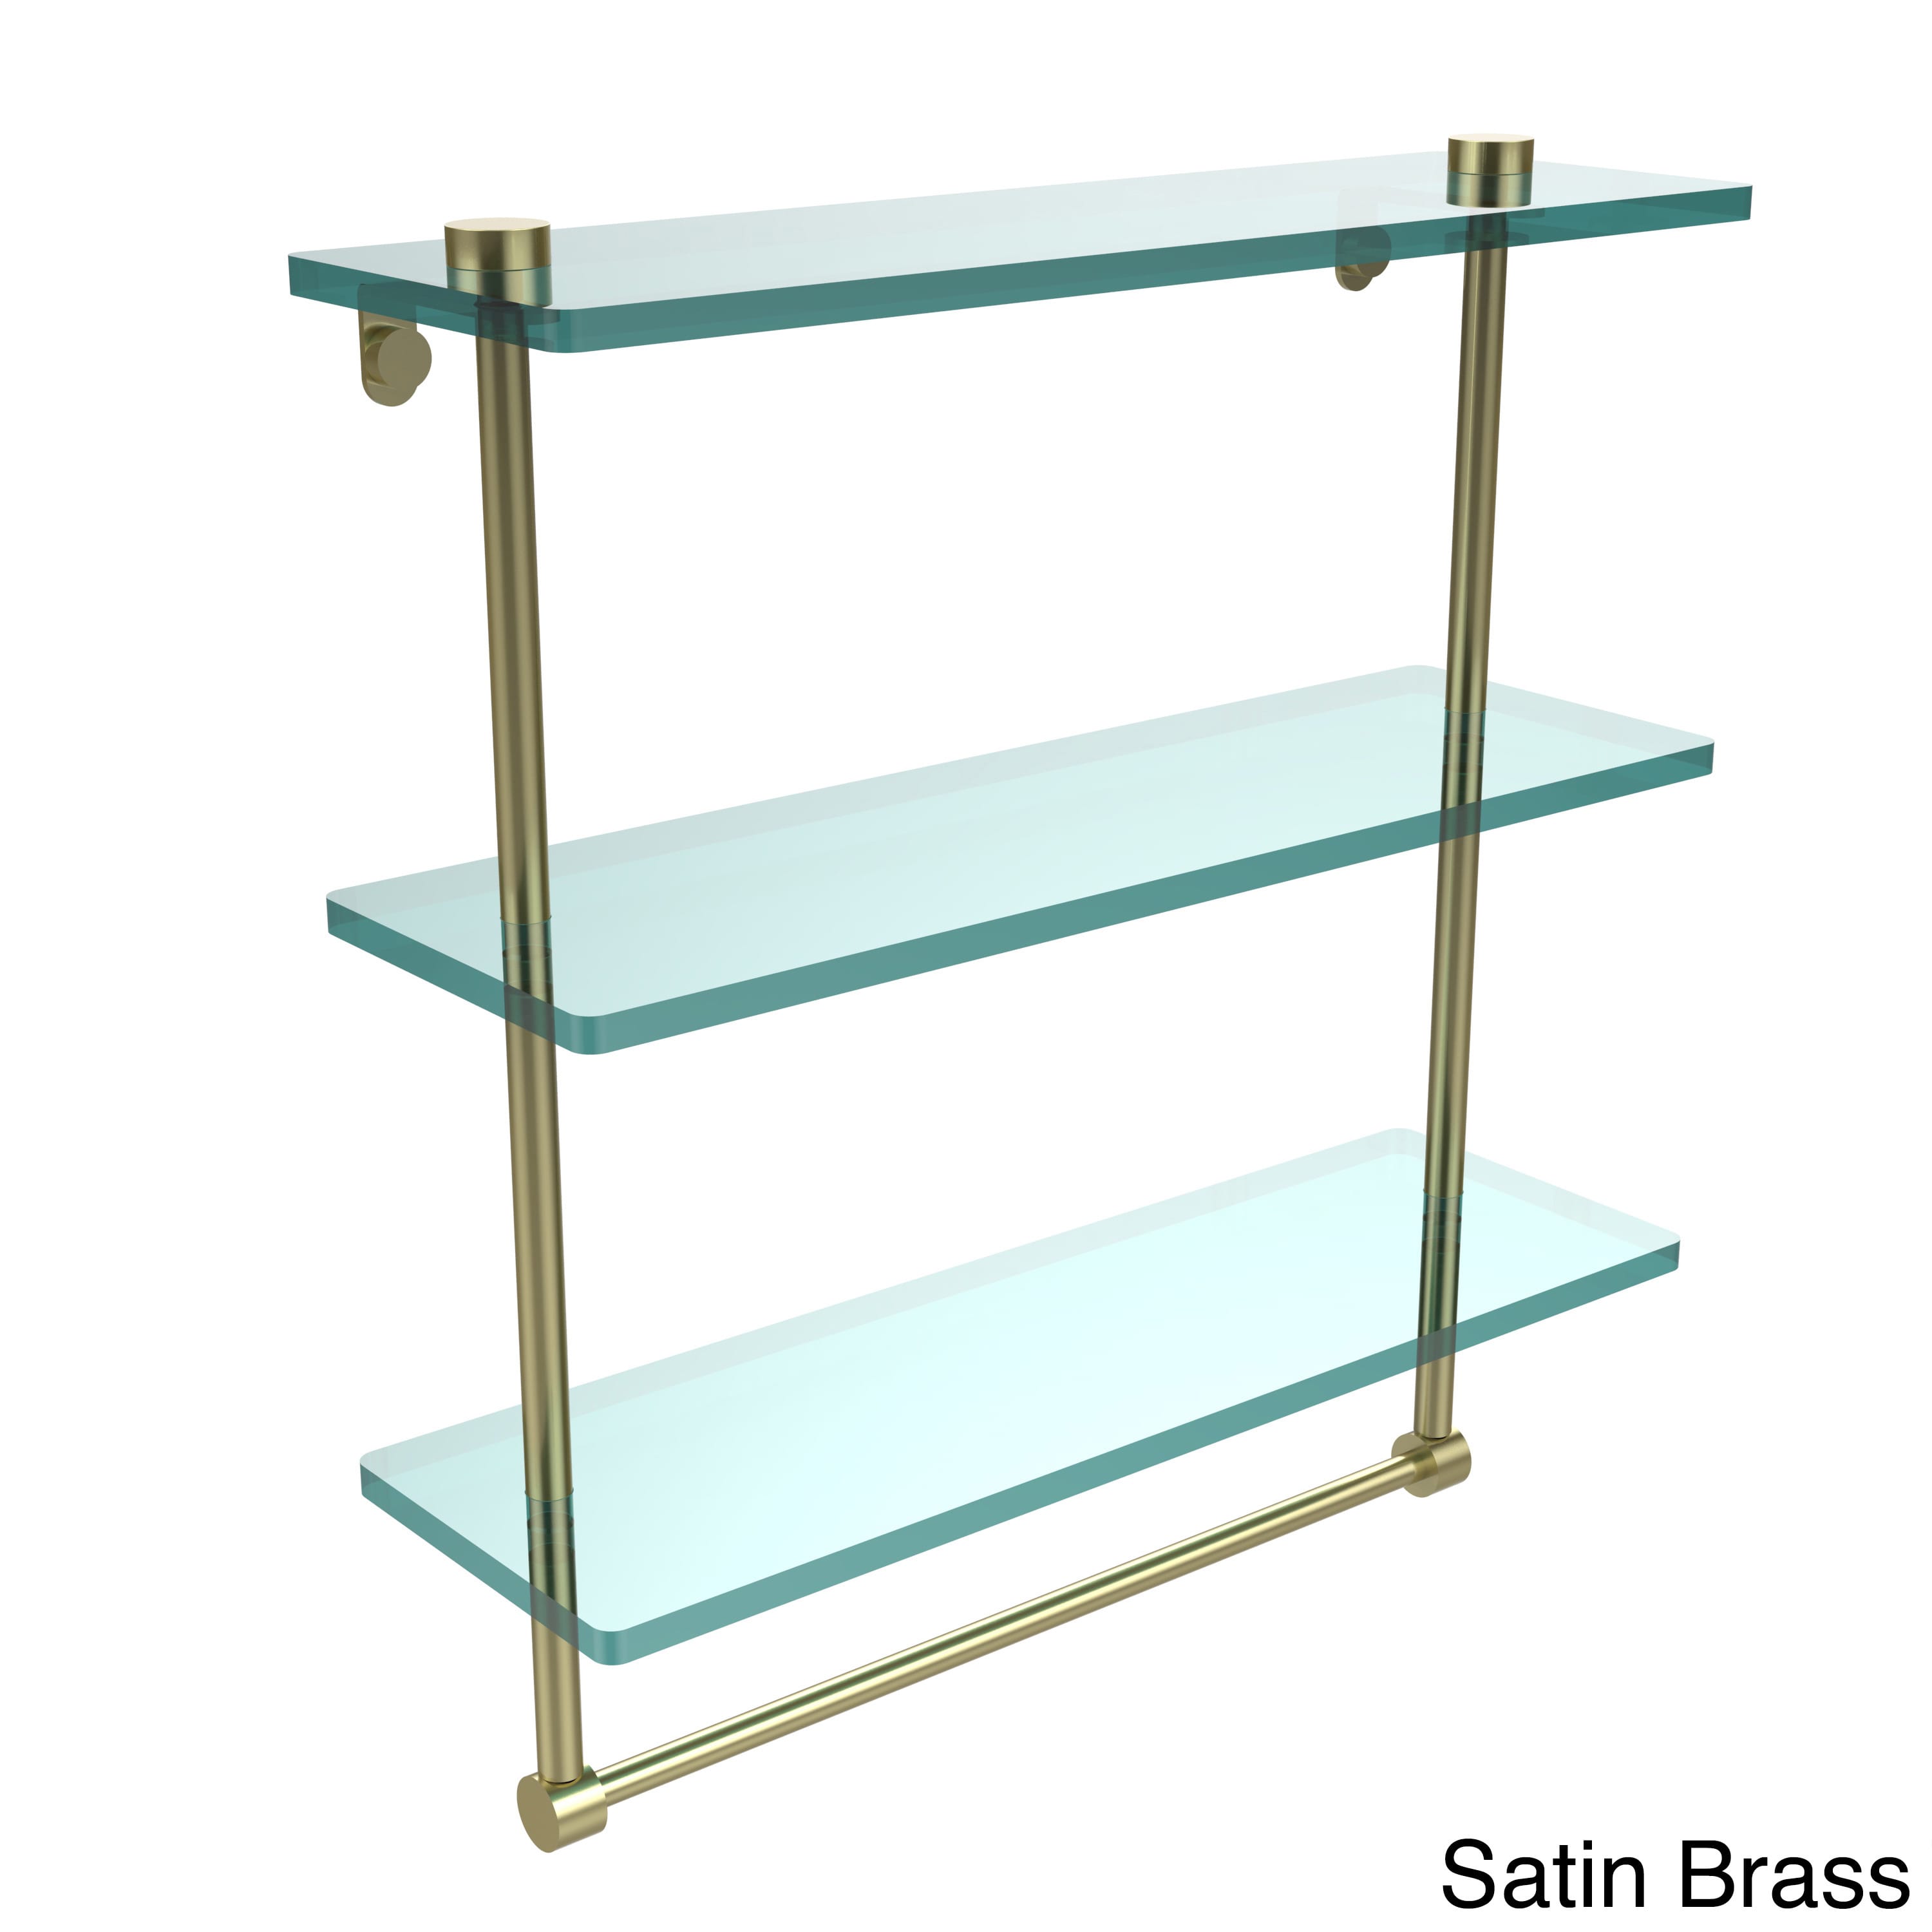 16-in Triple Tiered Glass Shelf with Integrated Towel Bar in Polished Nickel - image 5 of 5